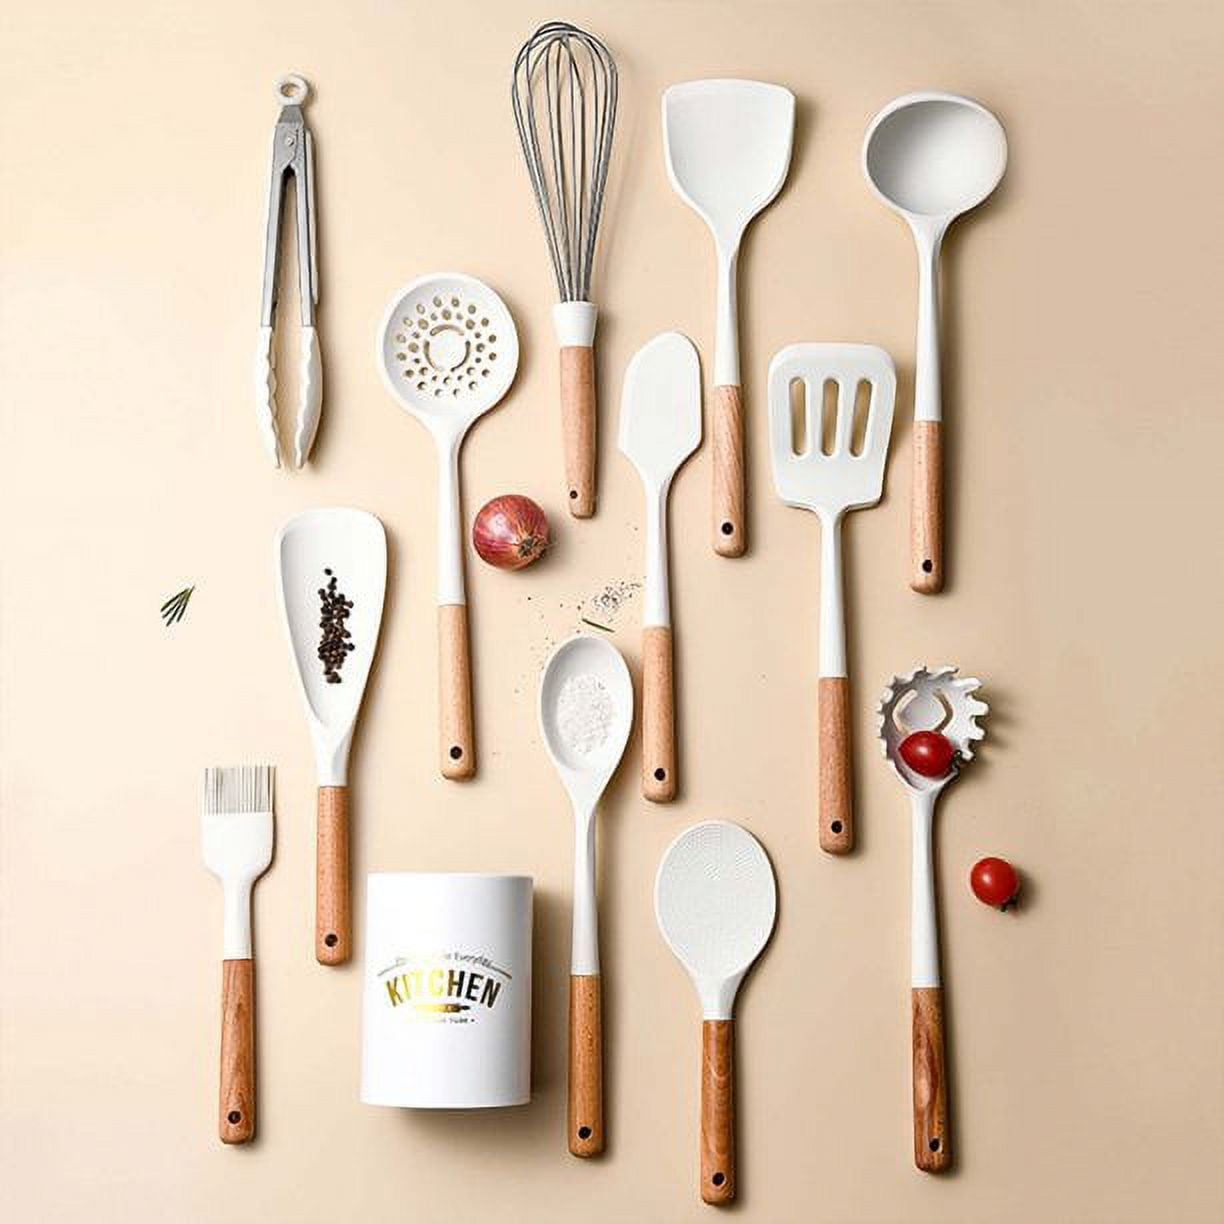 LIANYU 33-Piece Silicone Kitchen Cooking Utensils Set with Holder, Wooden  Handle Heat Resistant Cook…See more LIANYU 33-Piece Silicone Kitchen  Cooking